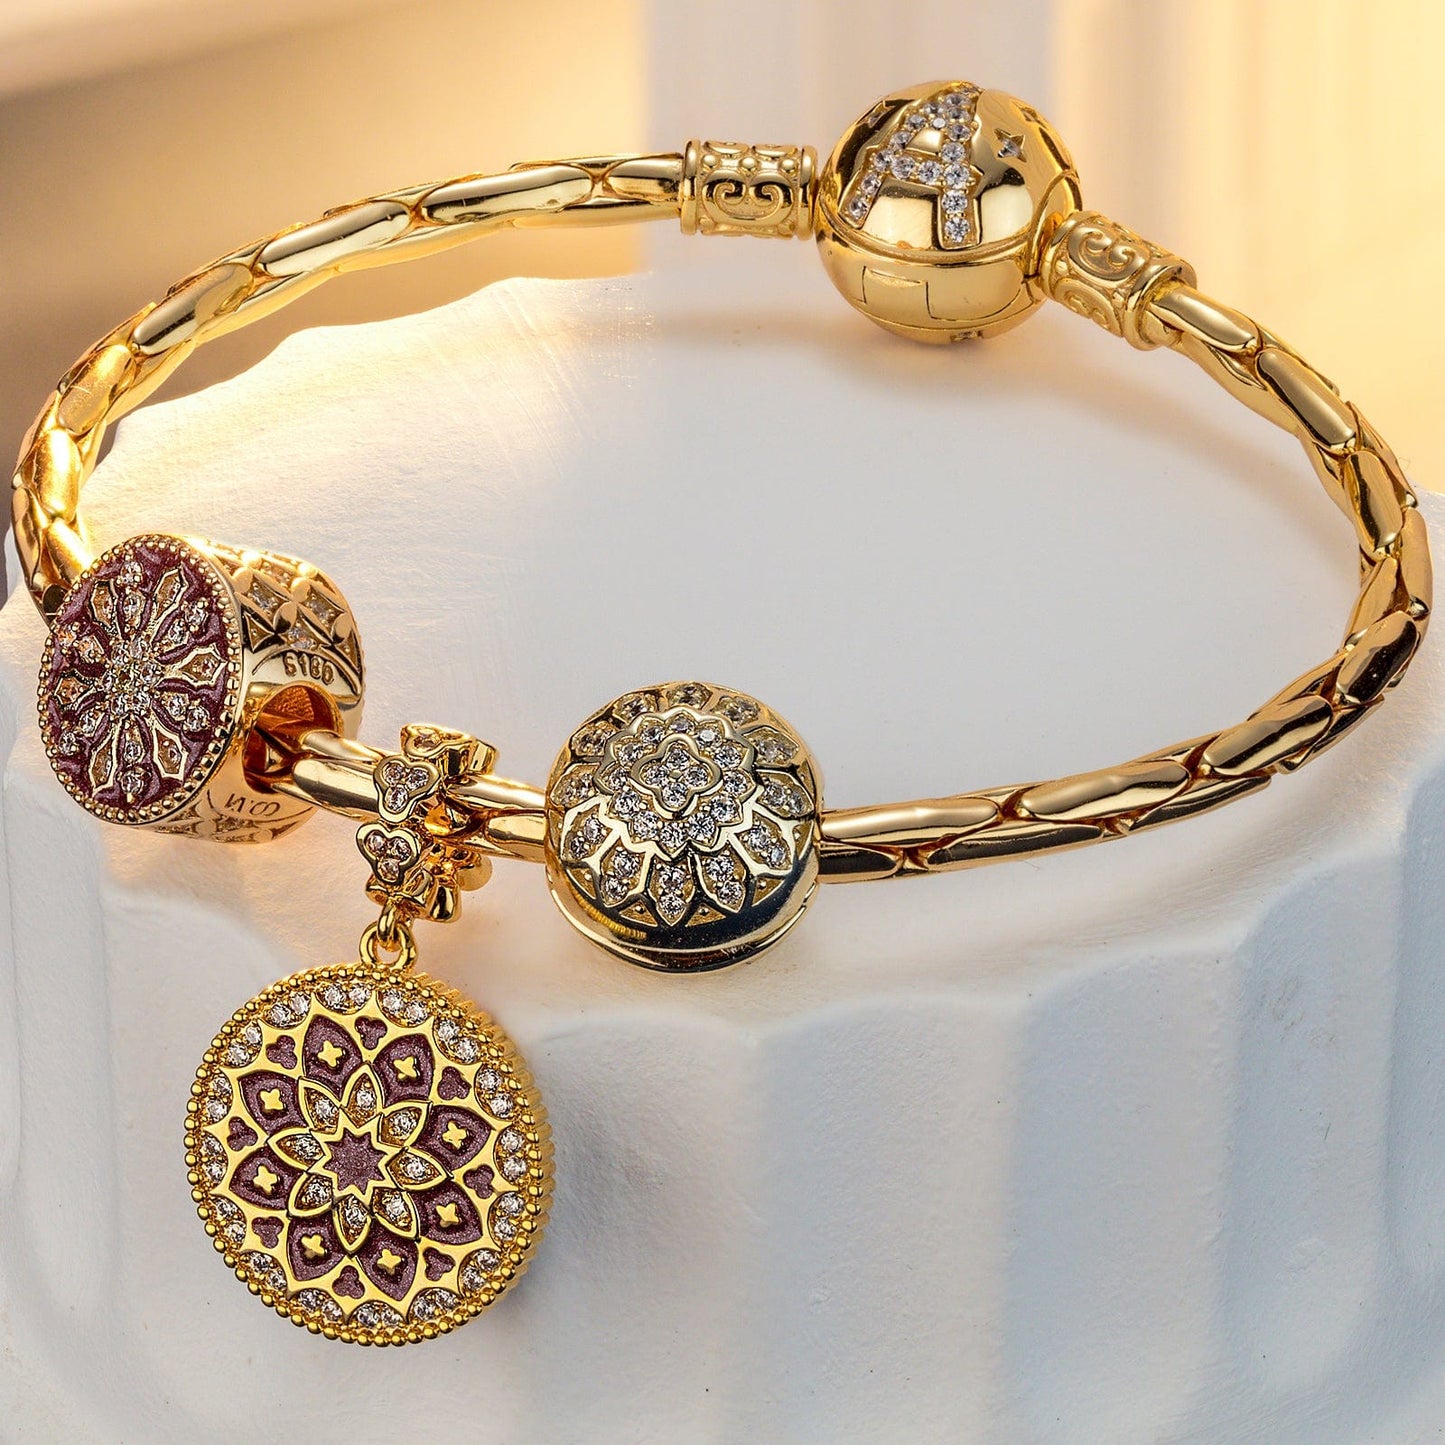 Sterling Silver Delicate Snowflakes Charms Bracelet Set With Enamel In 14K Gold Plated